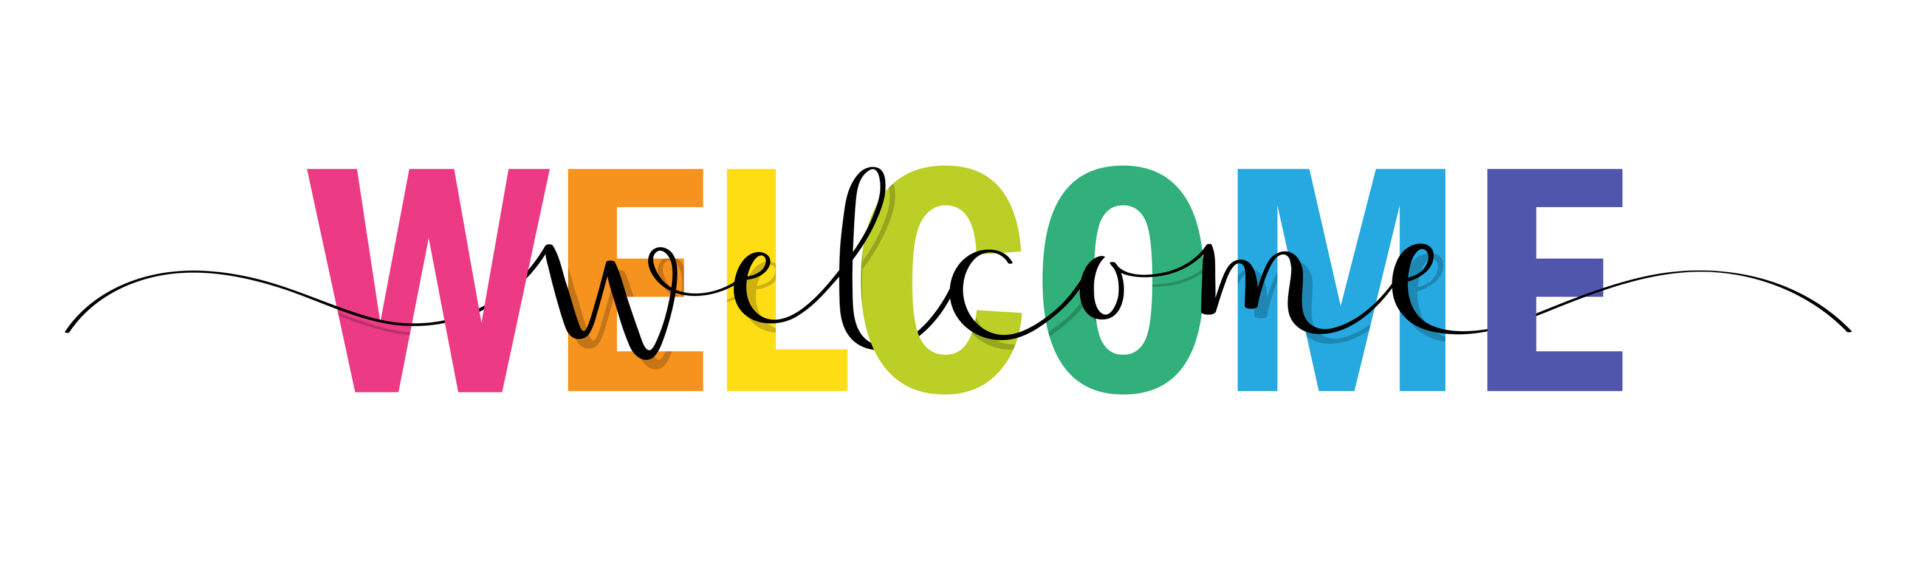 welcome in black cursive woven into block rainbow letters that also say welcome